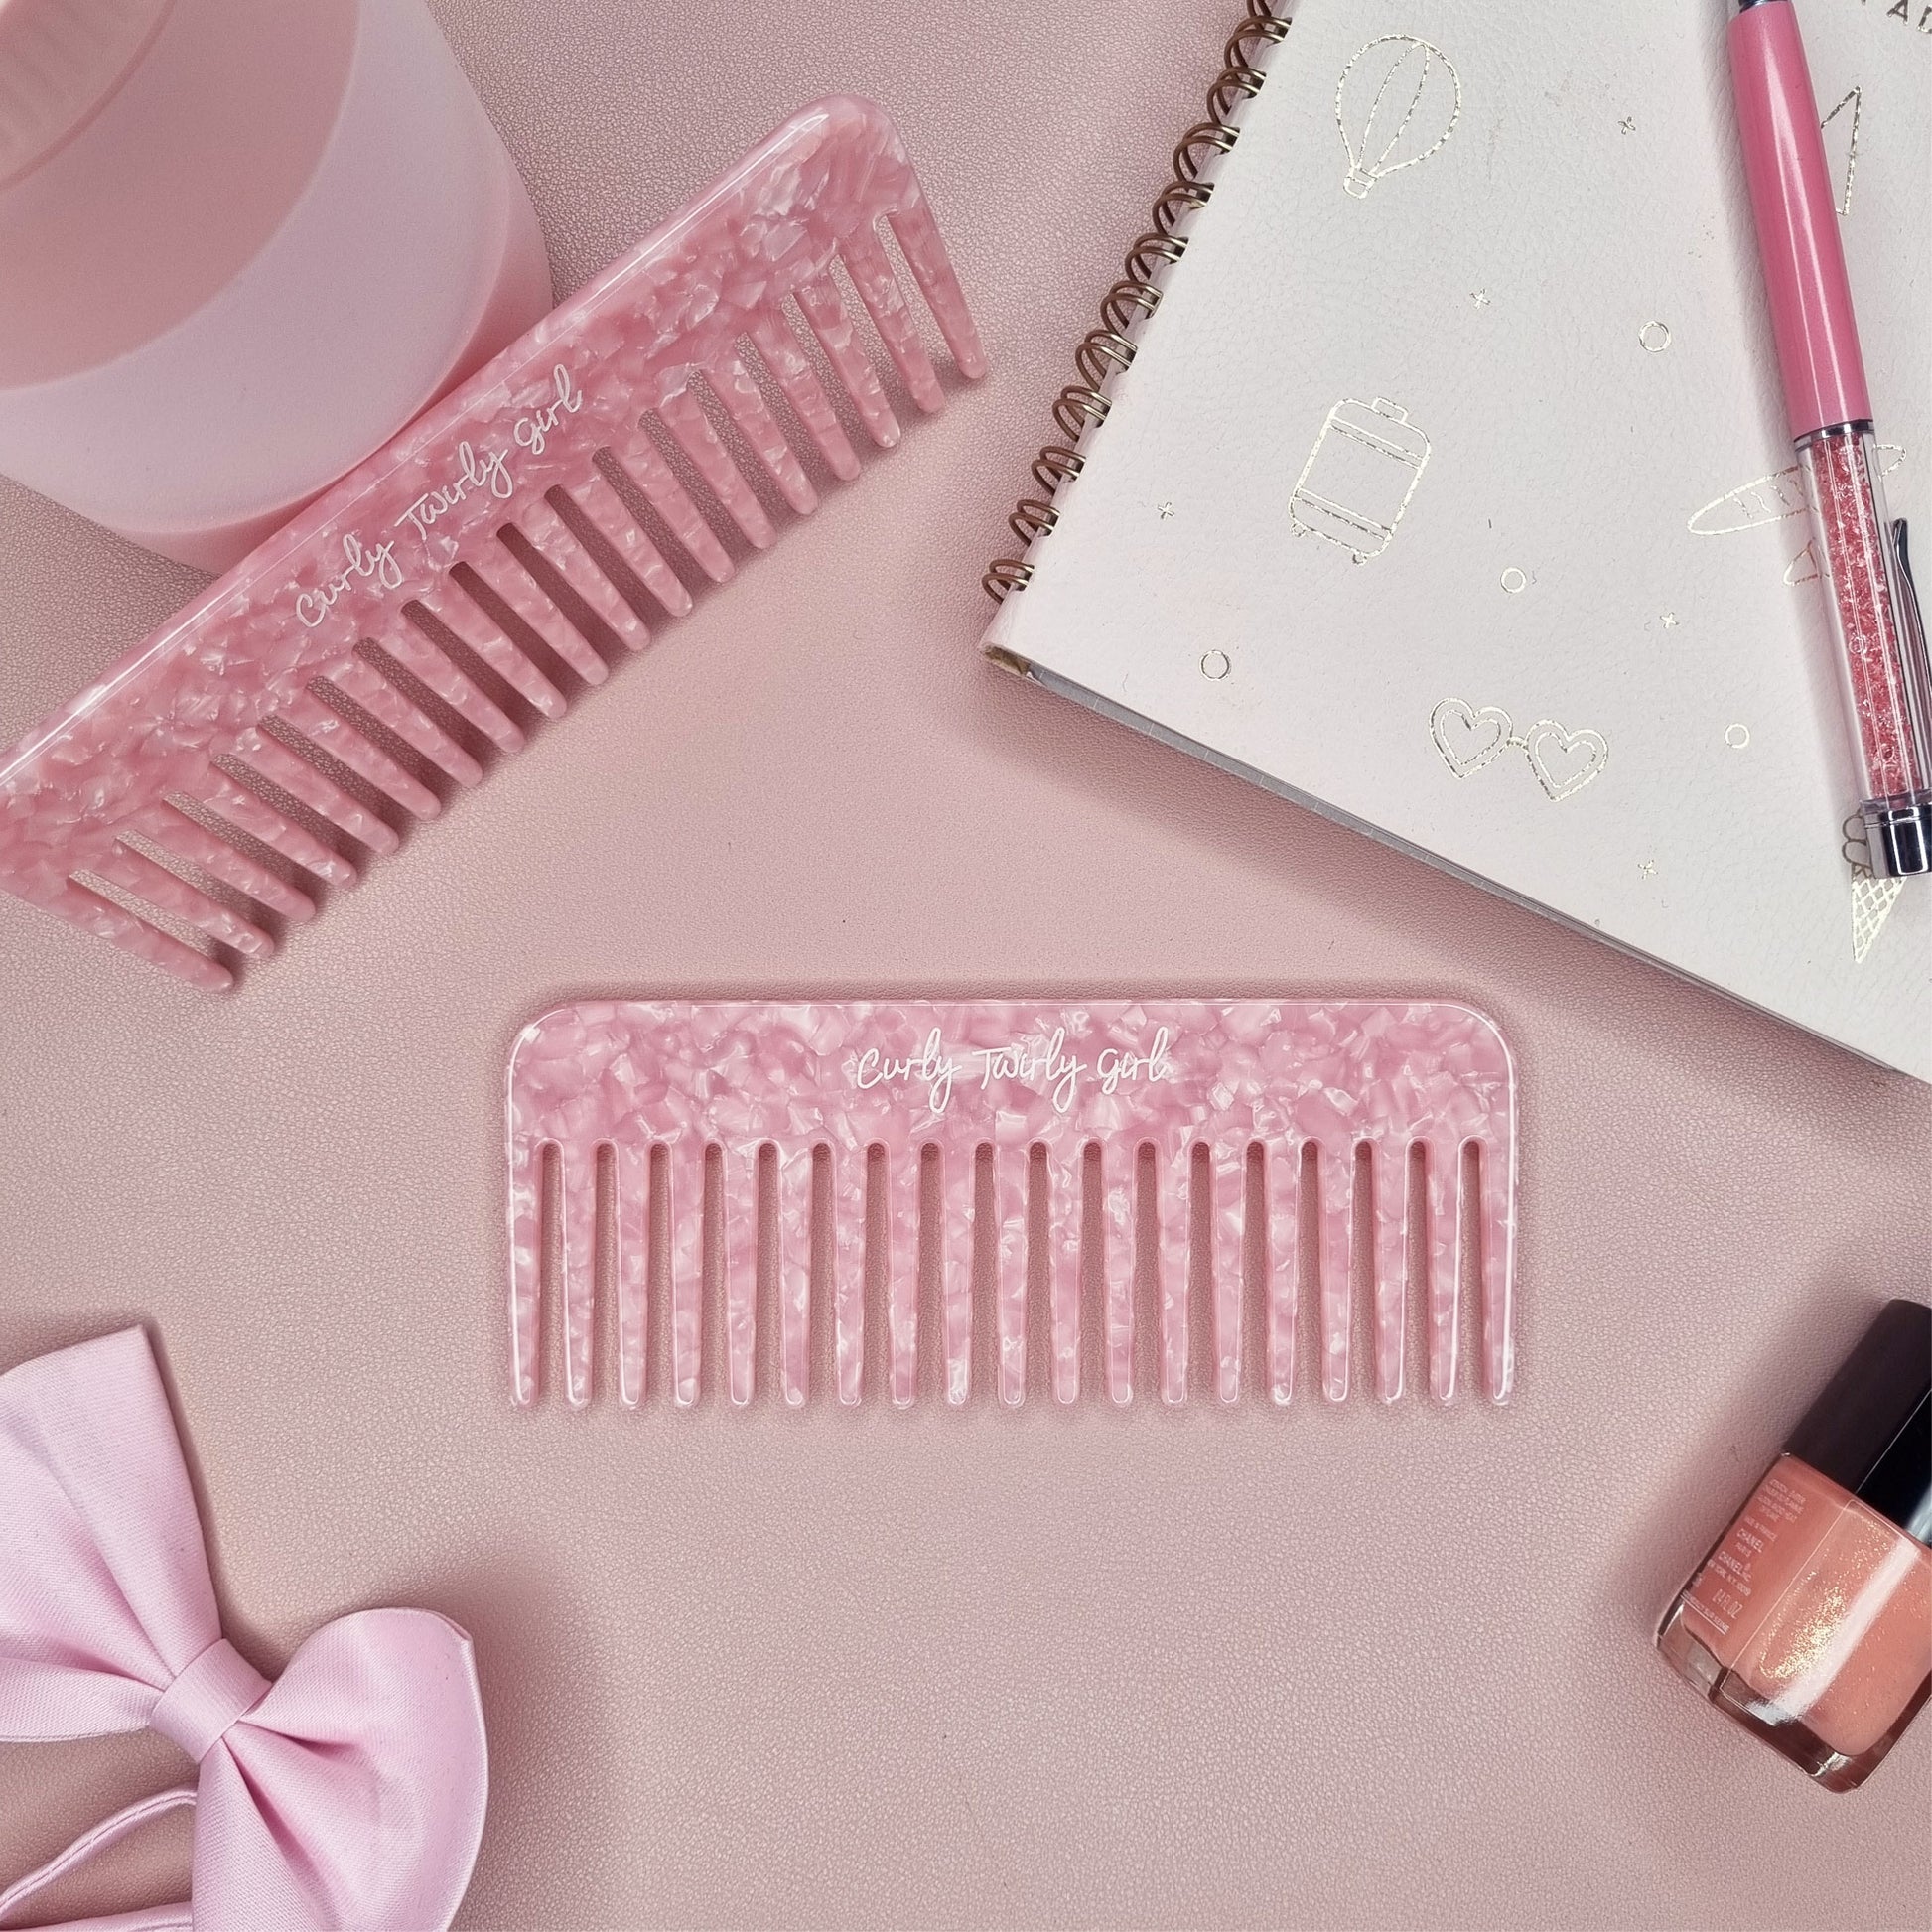 Pink wide tooth comb on a pink table